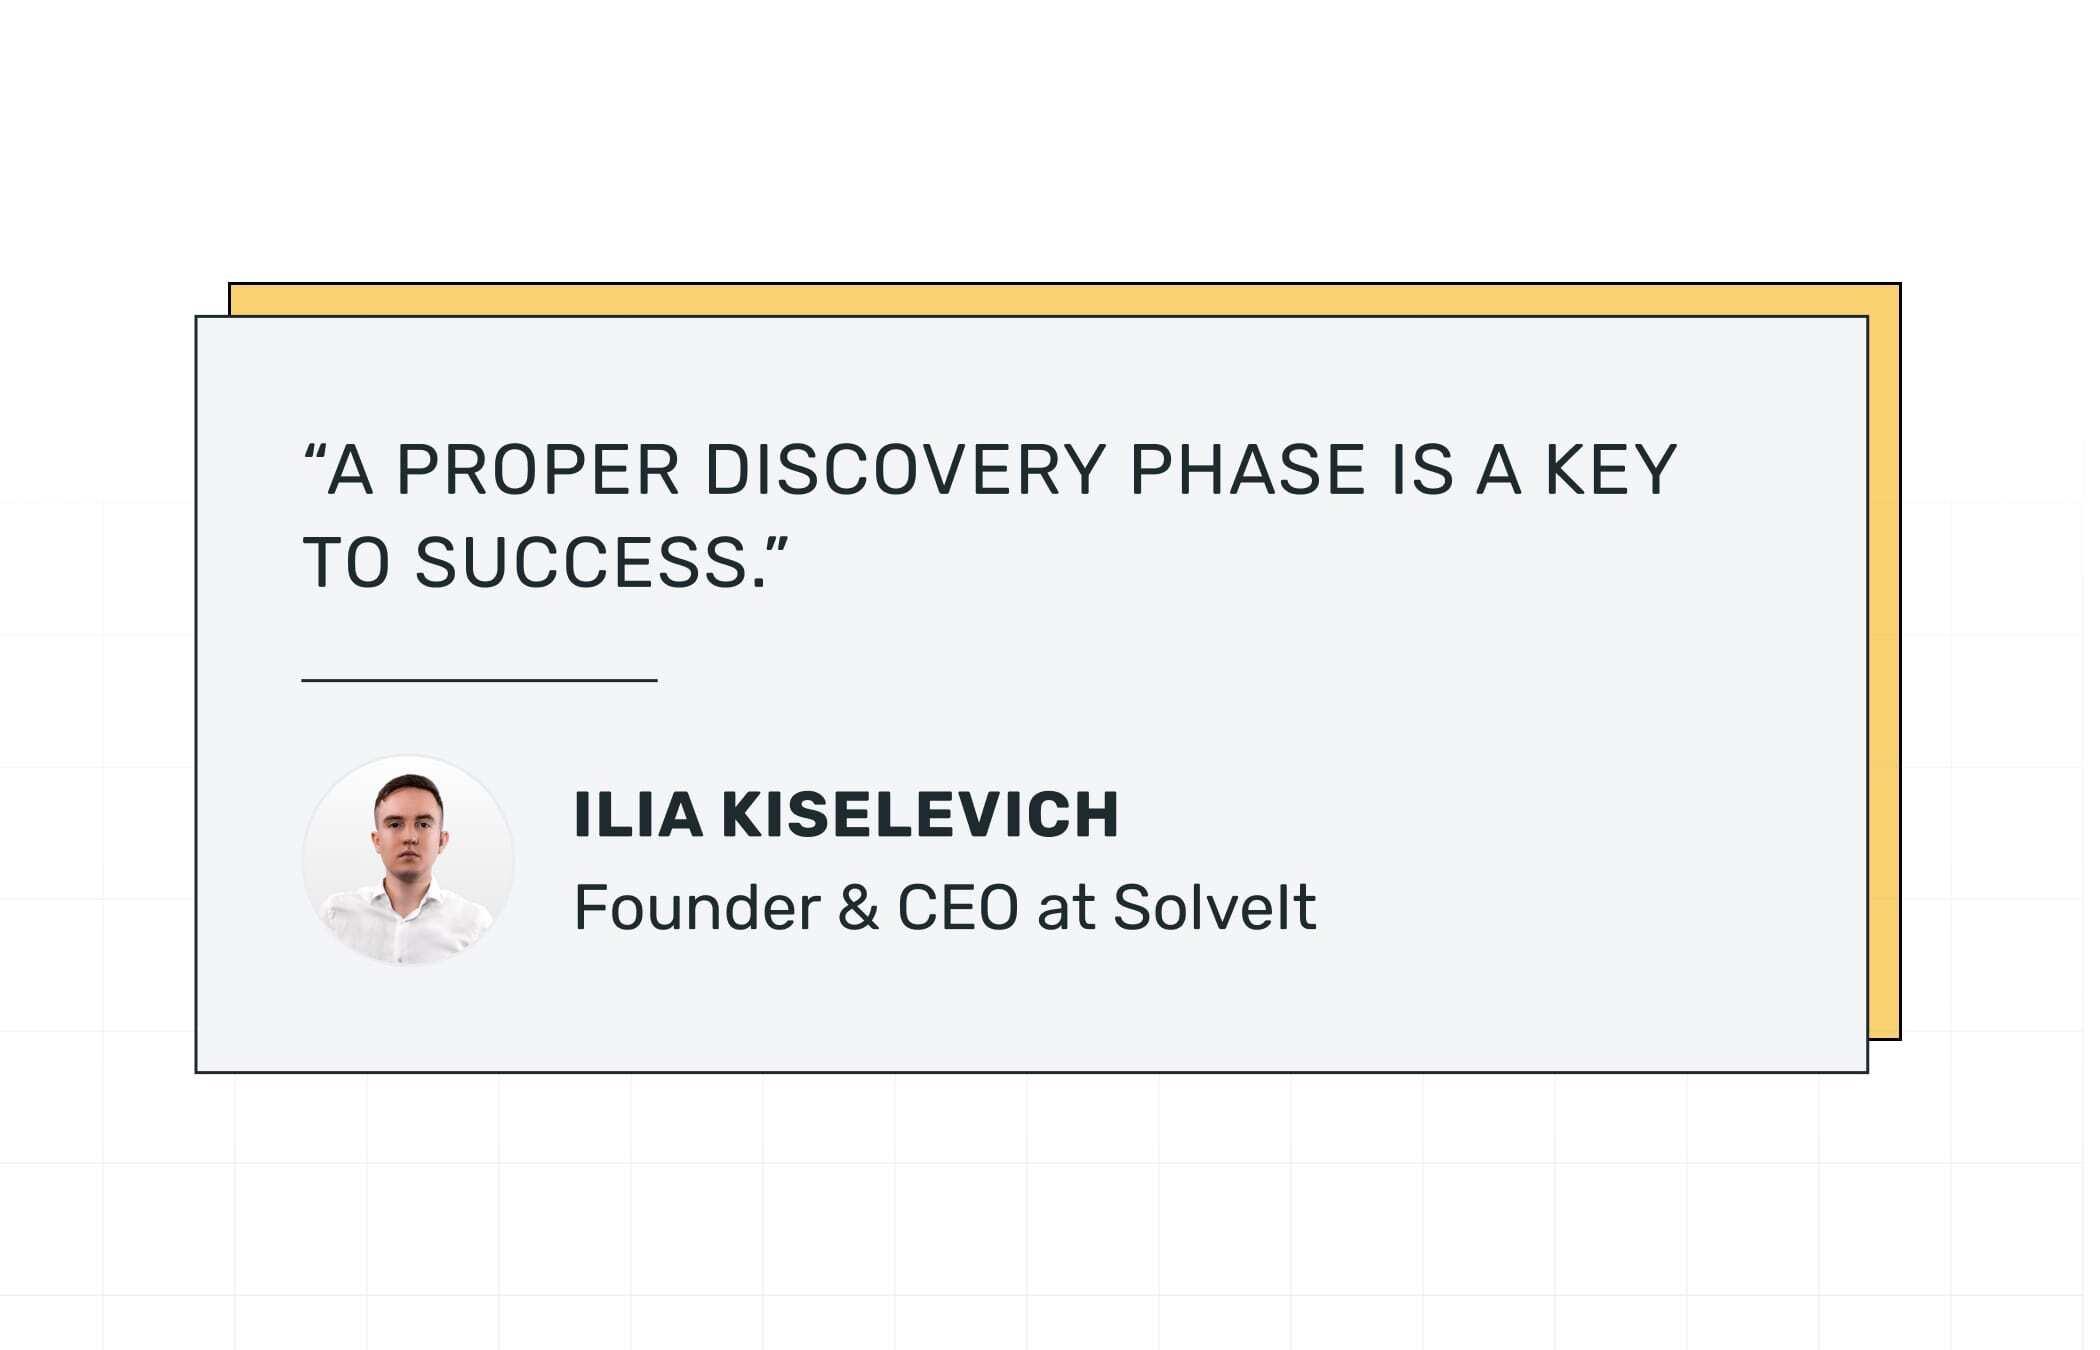 Importance of project discovery phase